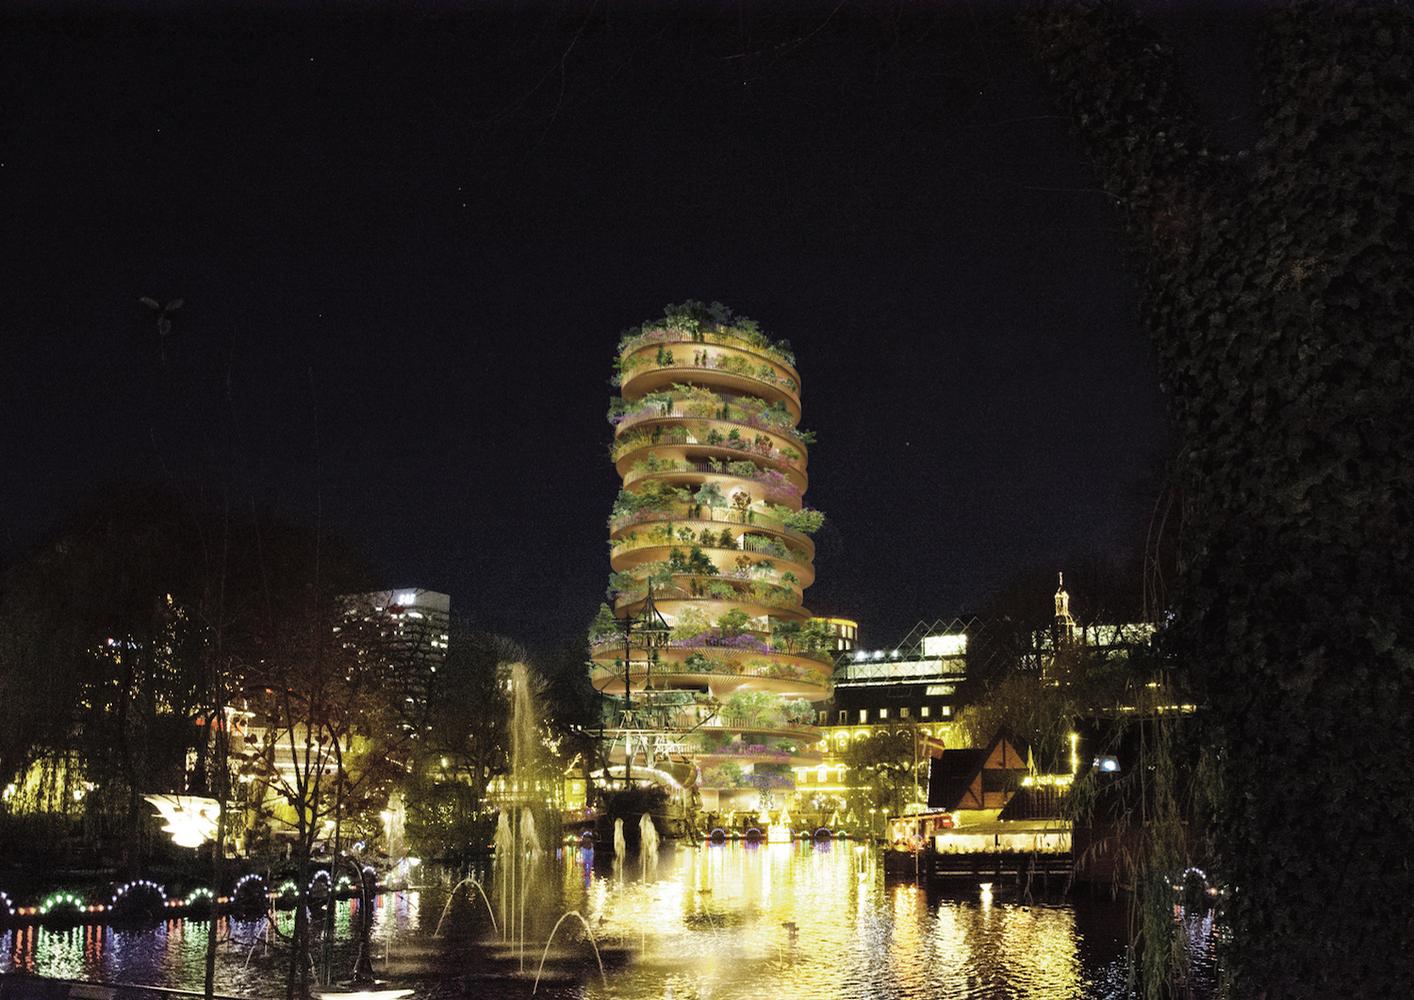 The proposed building has been called a hybrid of 'past, present, and fantasy' / Bjarke Ingels Group